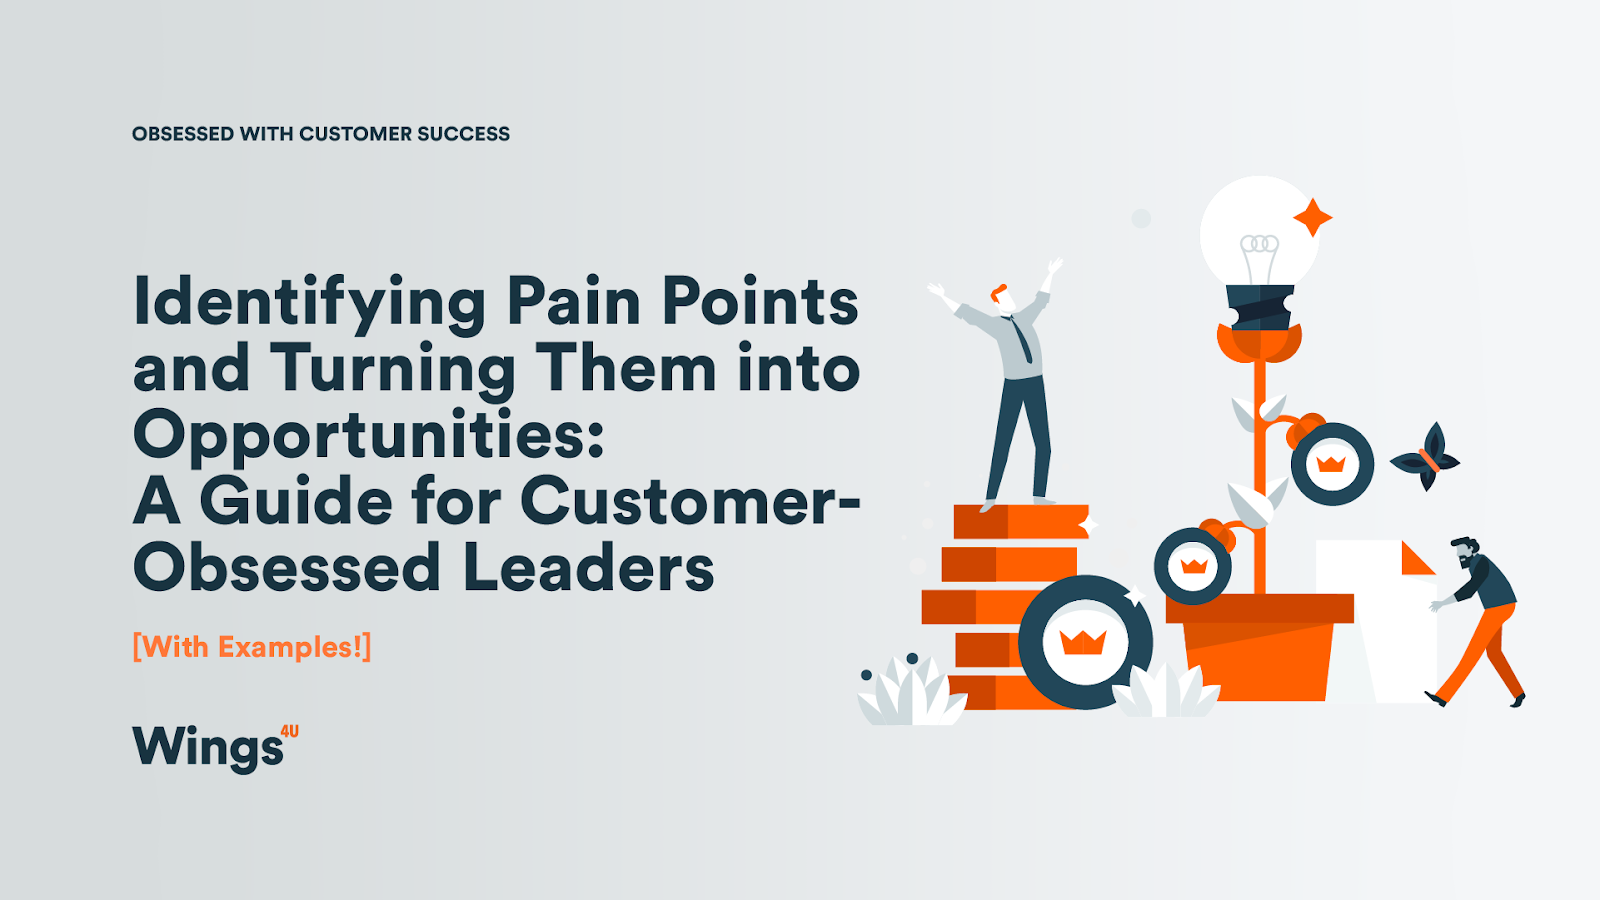 Identifying Pain Points and Turning Them into Opportunities [With Examples!]